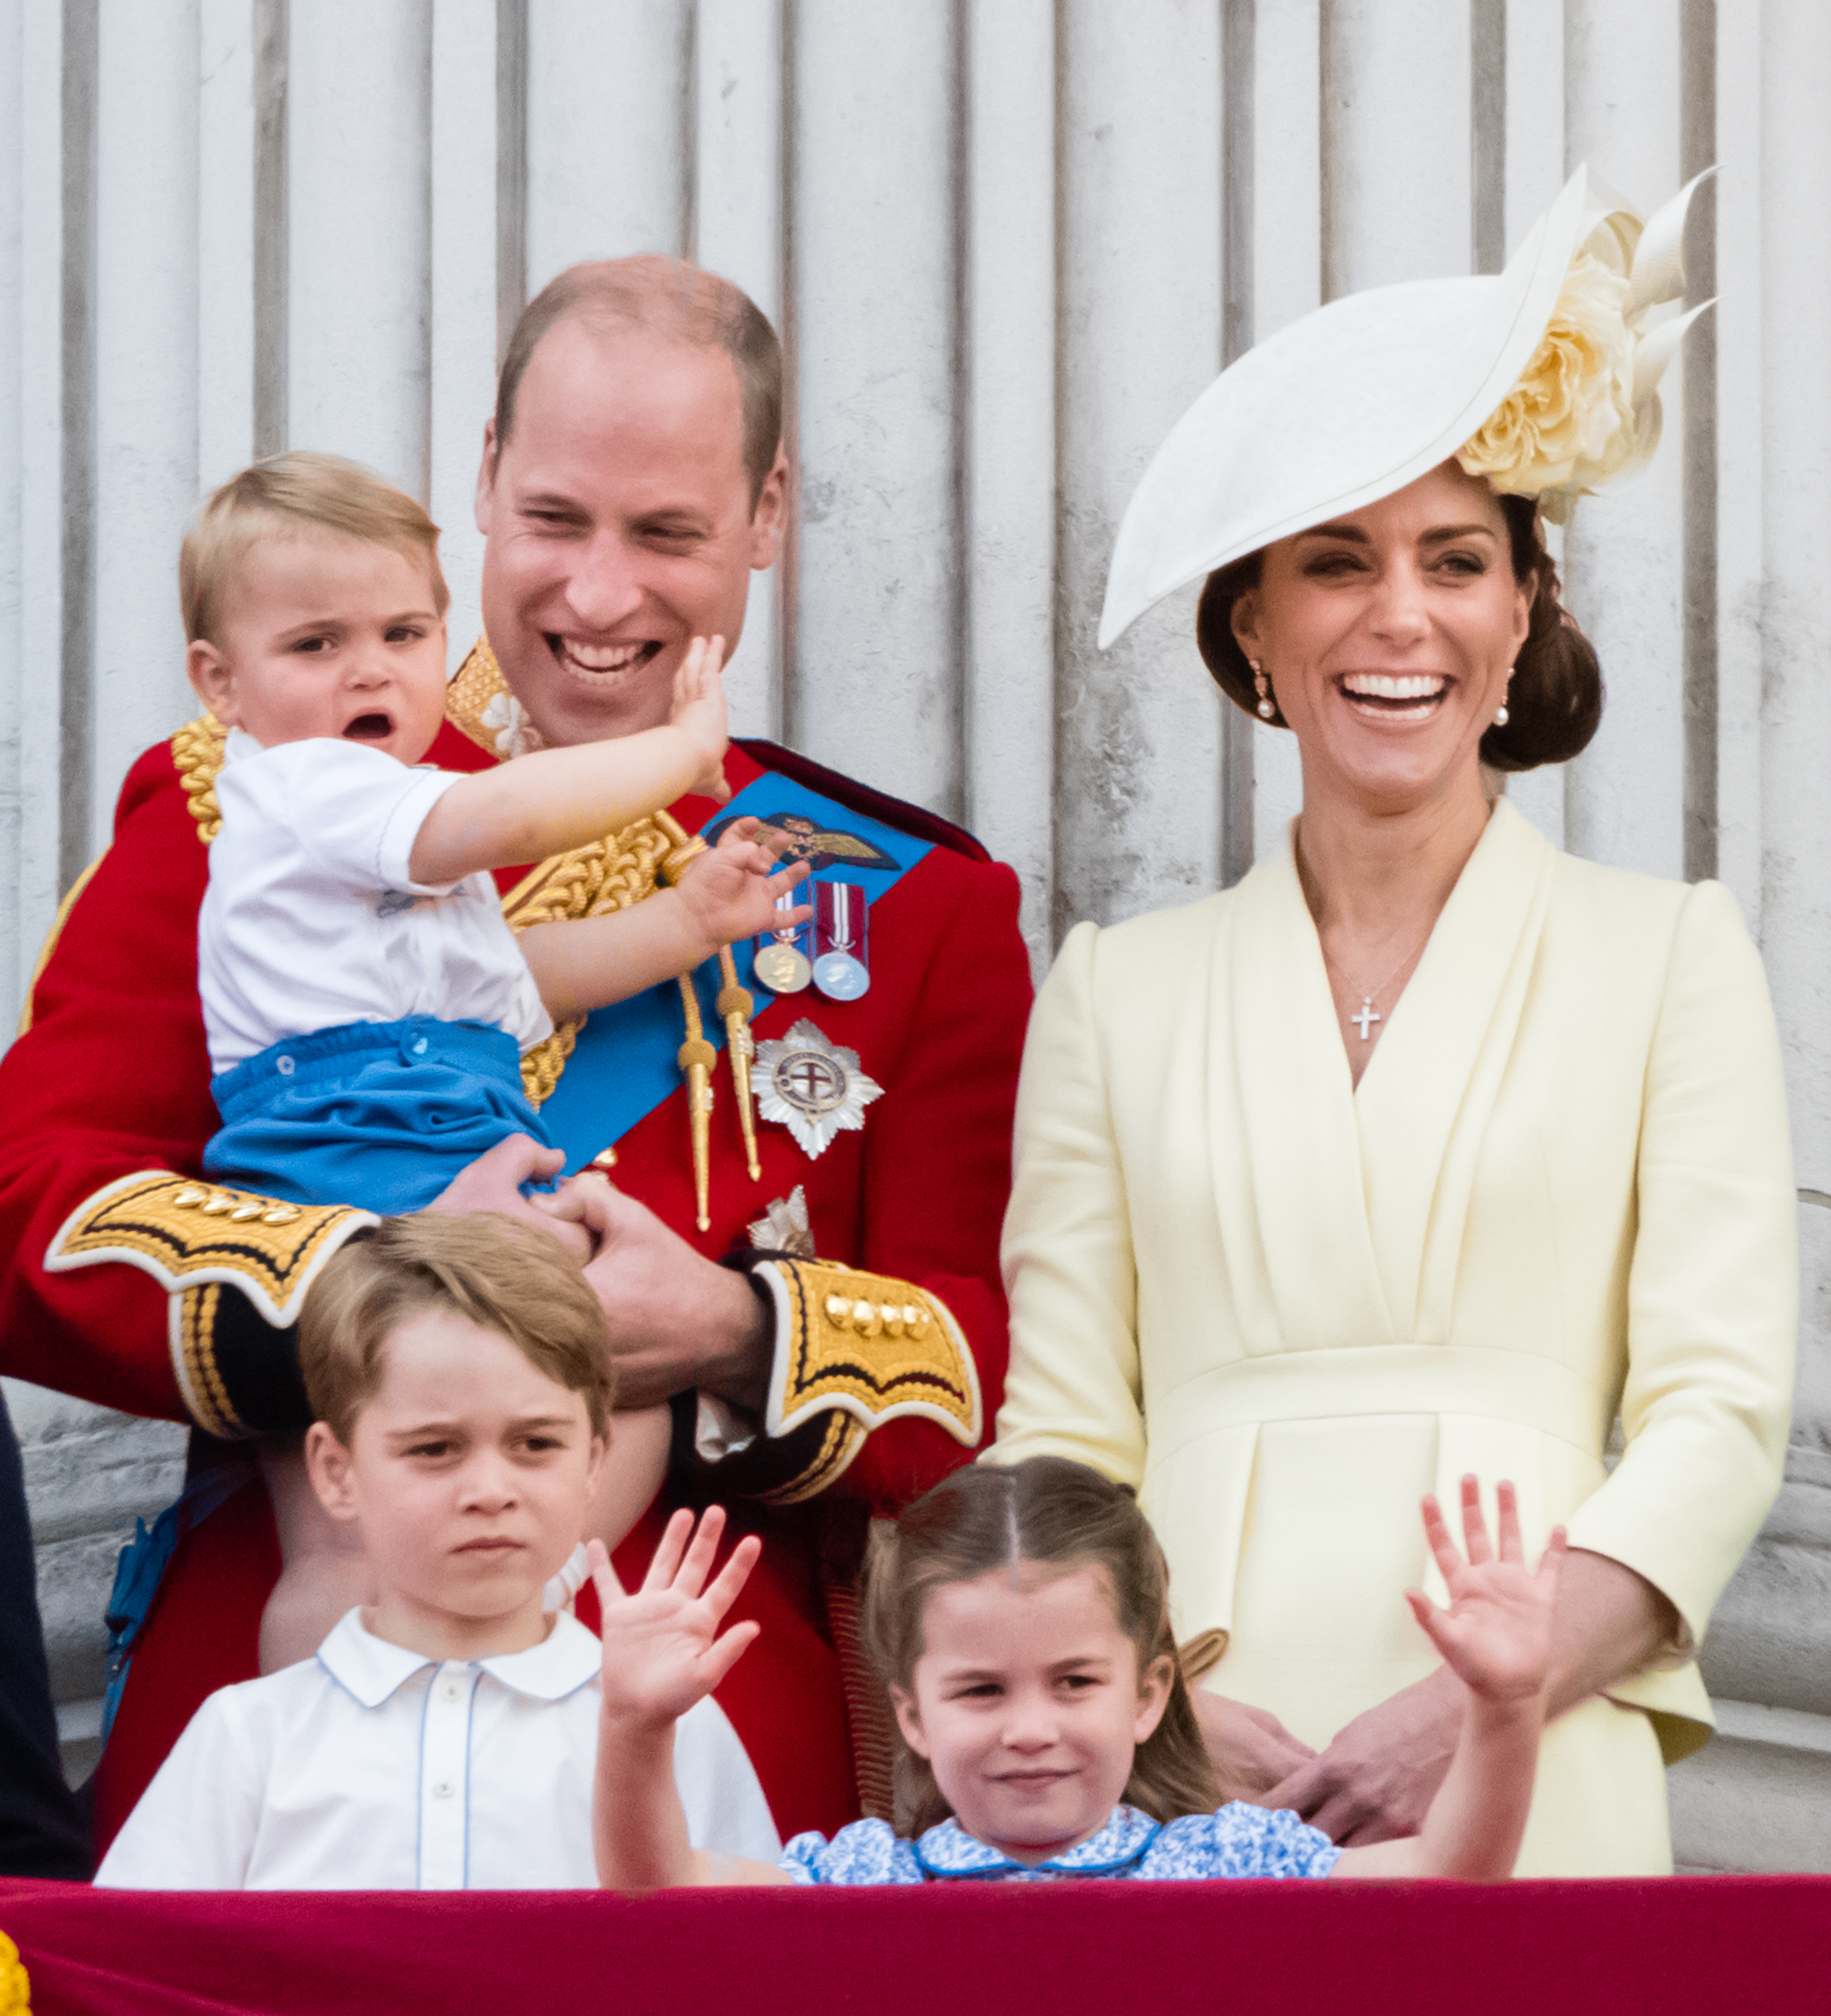 Prince Louis, Prince George, Prince William, Duke of Cambridge, Princess Charlotte  and Catherine, Duchess of Cambridge appear on the balcony during Trooping The Colour, the Queen's annual birthday parade, on June 08, 2019 in London, England. (Samir Hussein&mdash;WireImage)